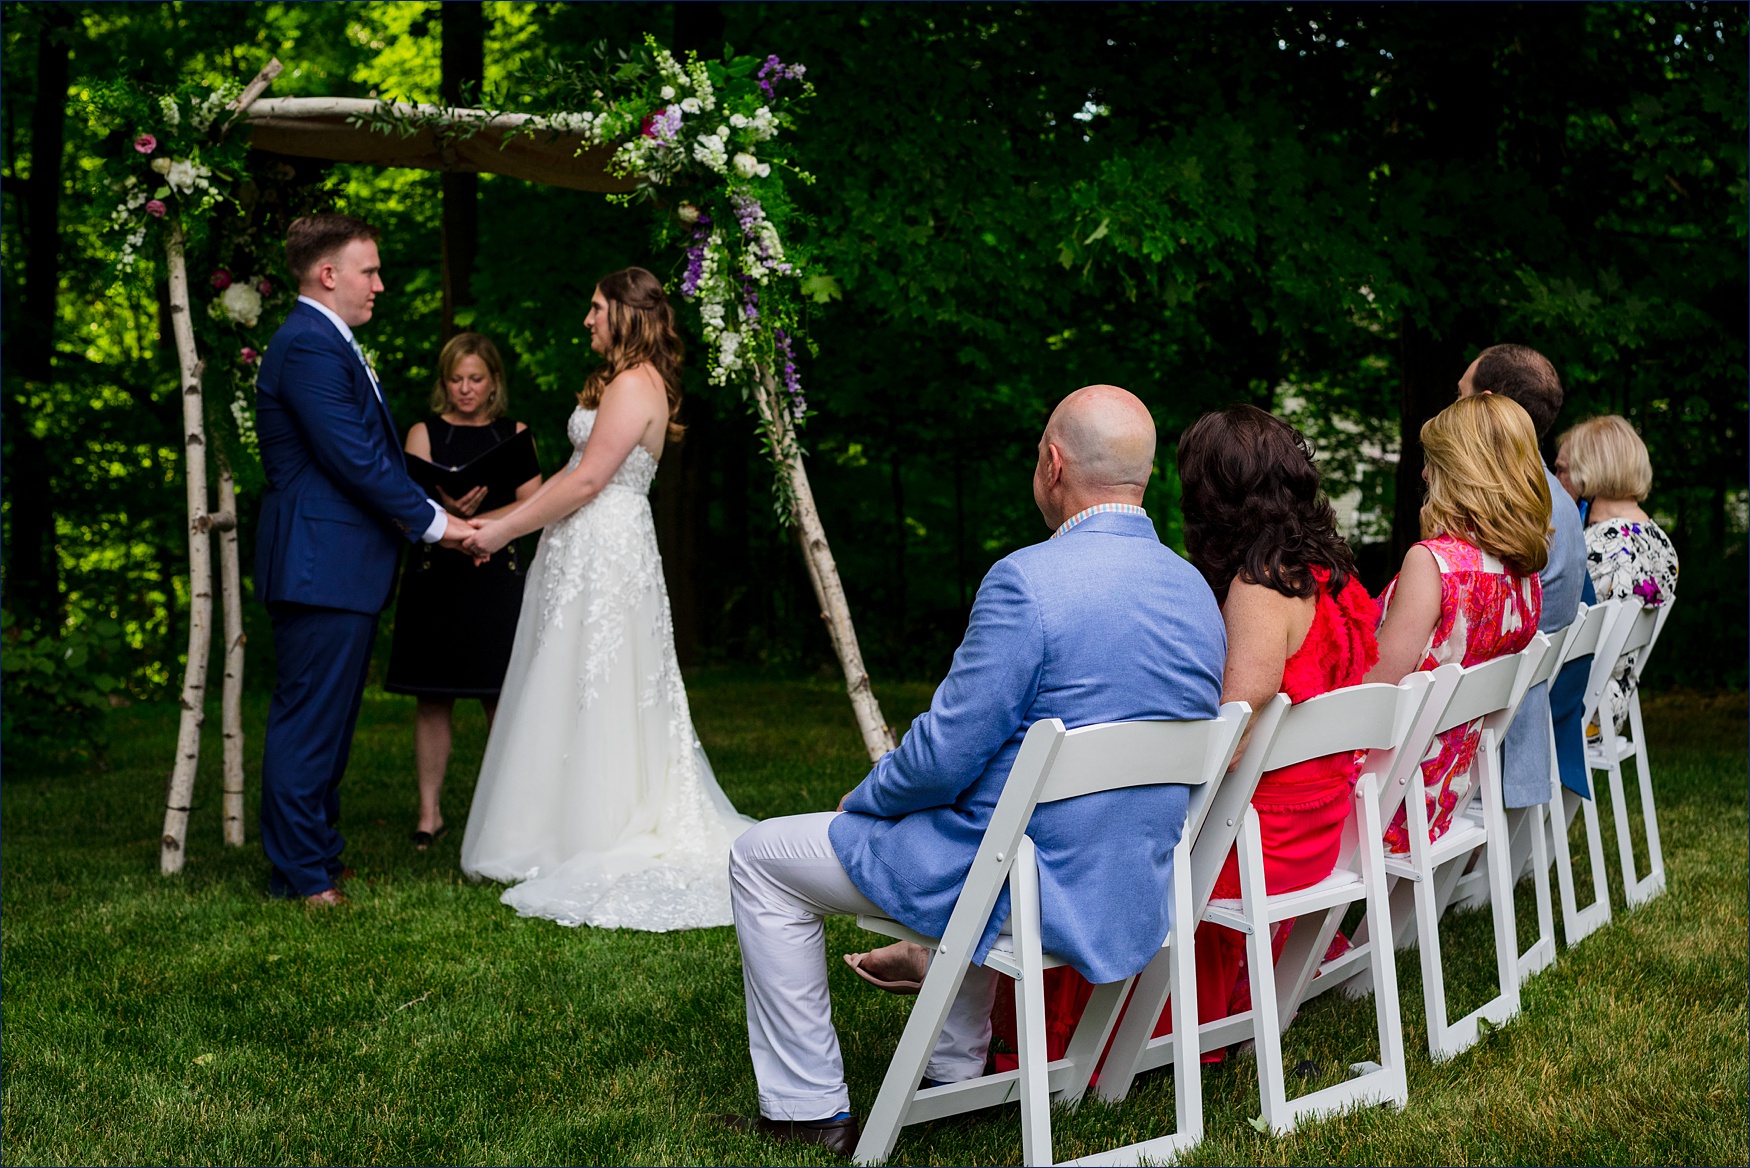 The family watches as two become one on their backyard wedding day